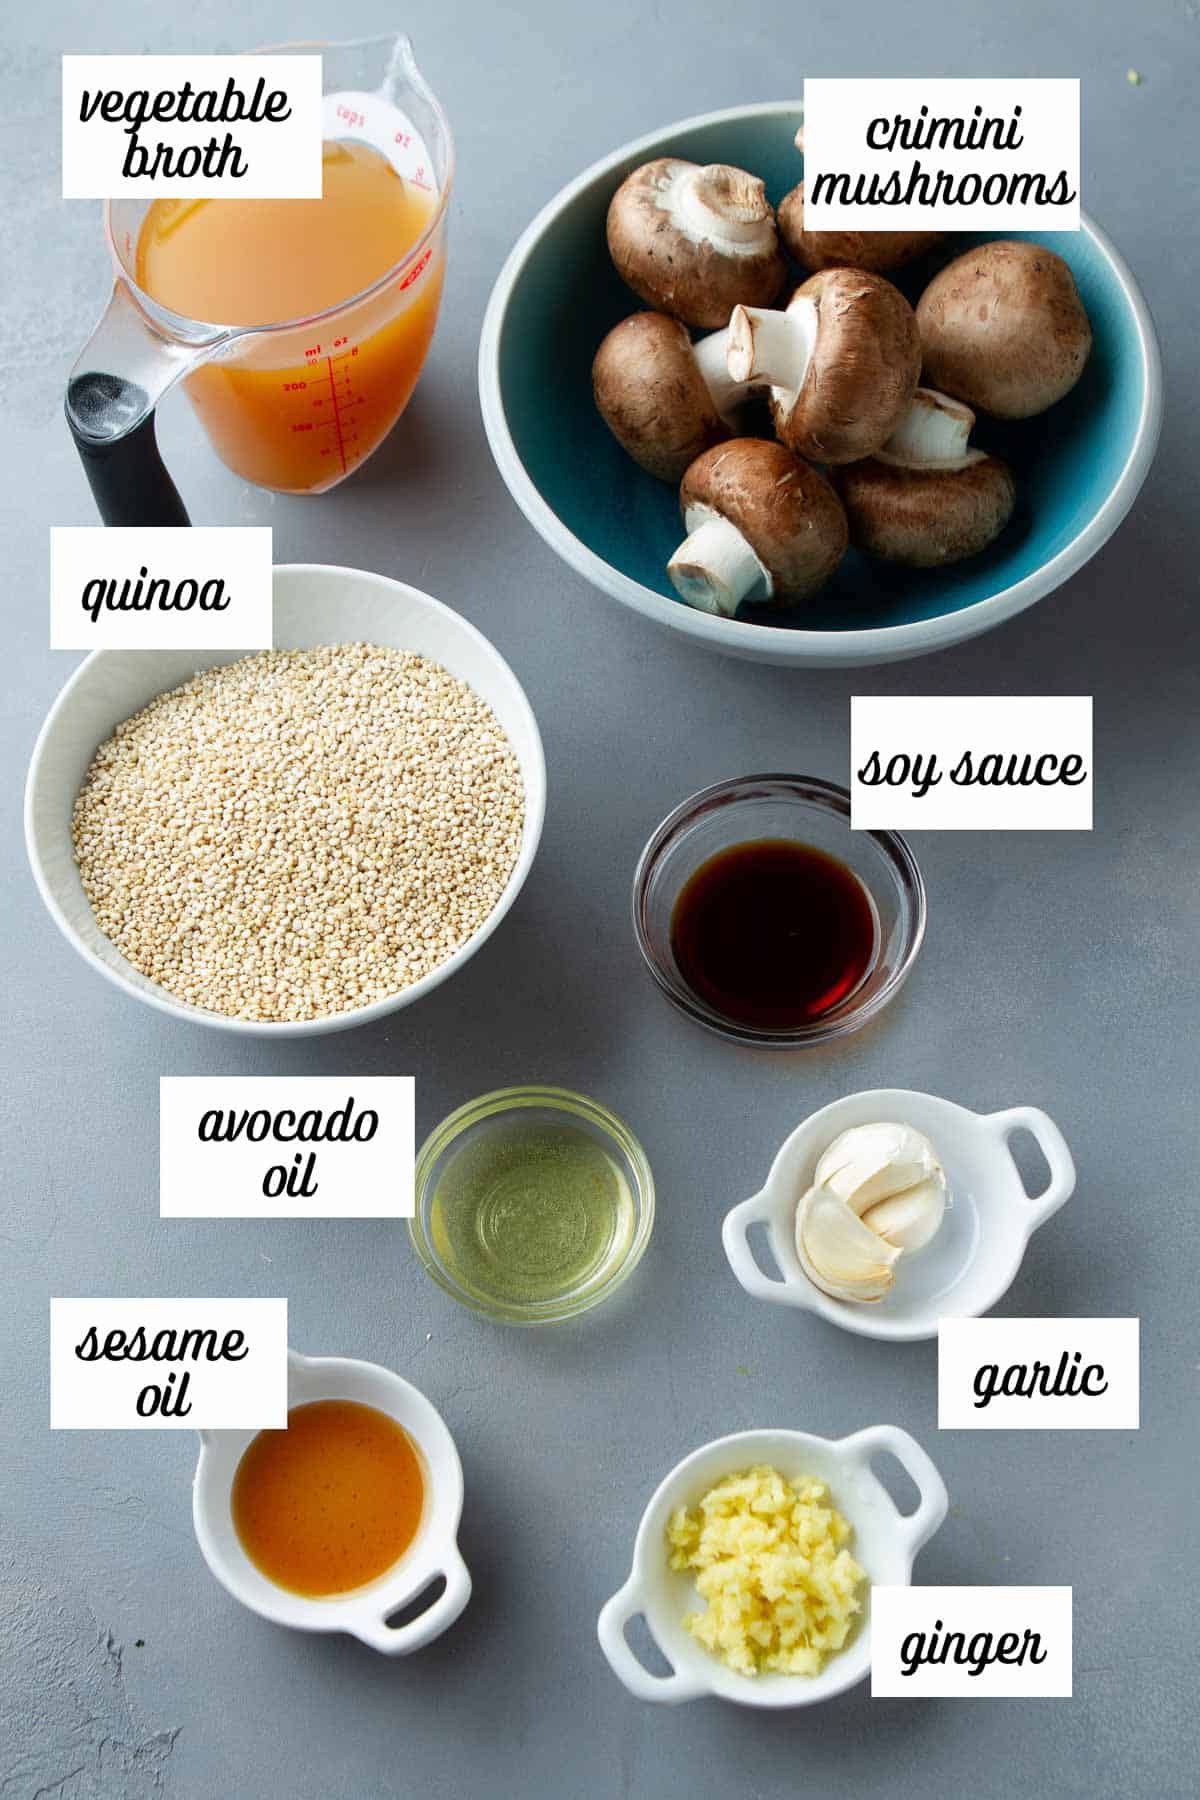 Labeled ingredients for mushroom quinoa recipe on a gray background.